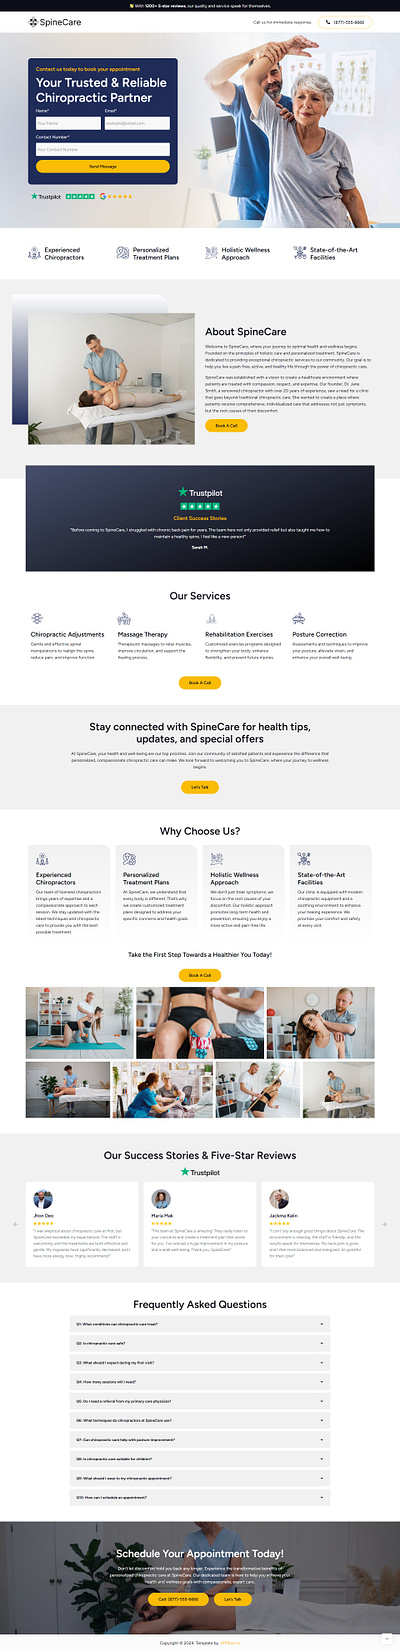 SpineCare – Chiropractic Lead Generation Landing Page best landing page chiropractic chiropractic landing pages chiropractic website chiropractic website design chiropractic website templates chiropractor chiropractor landing page elementor template landing page lead generation landing page